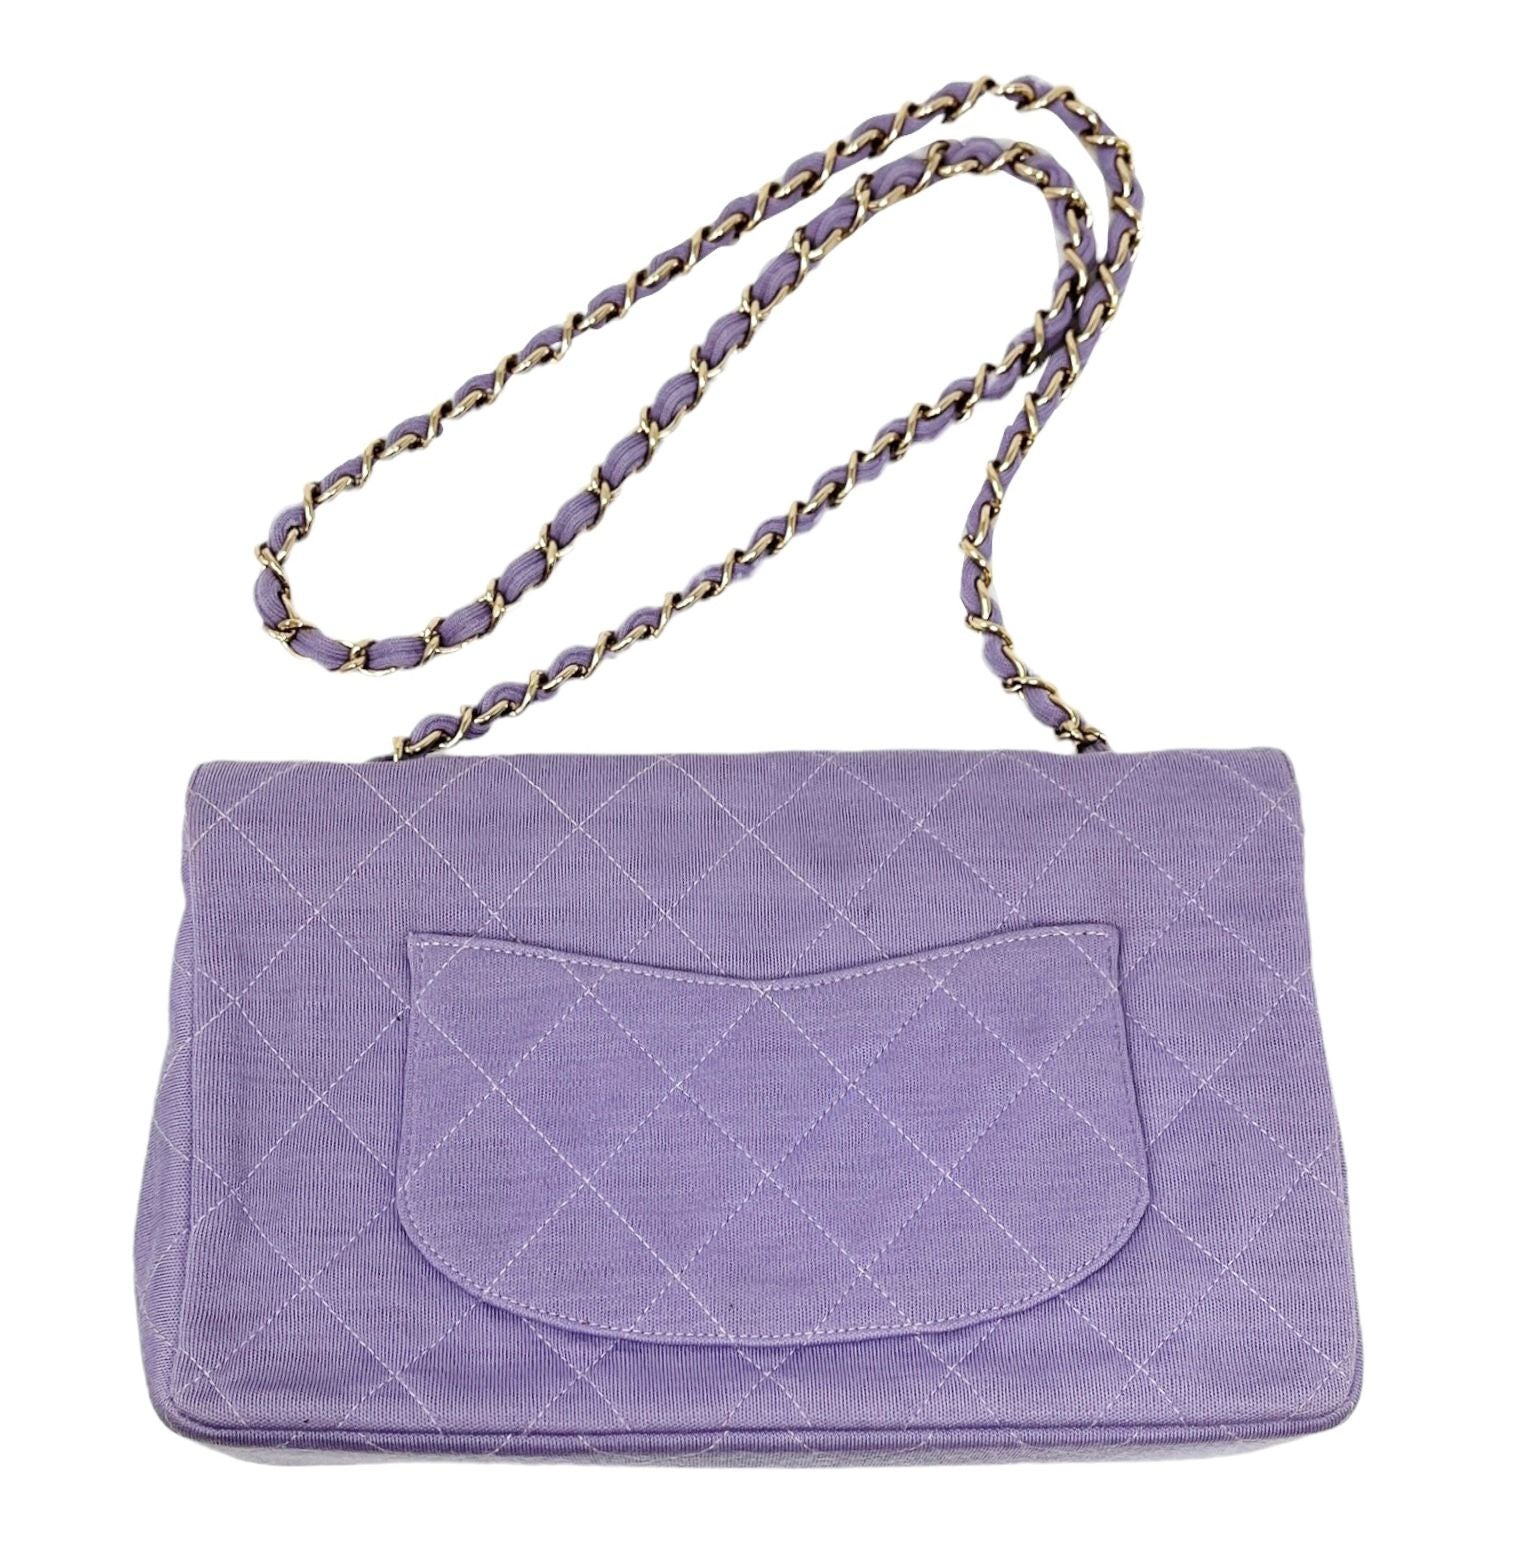 Chanel Lilac Knit Turnlock Flap Bag